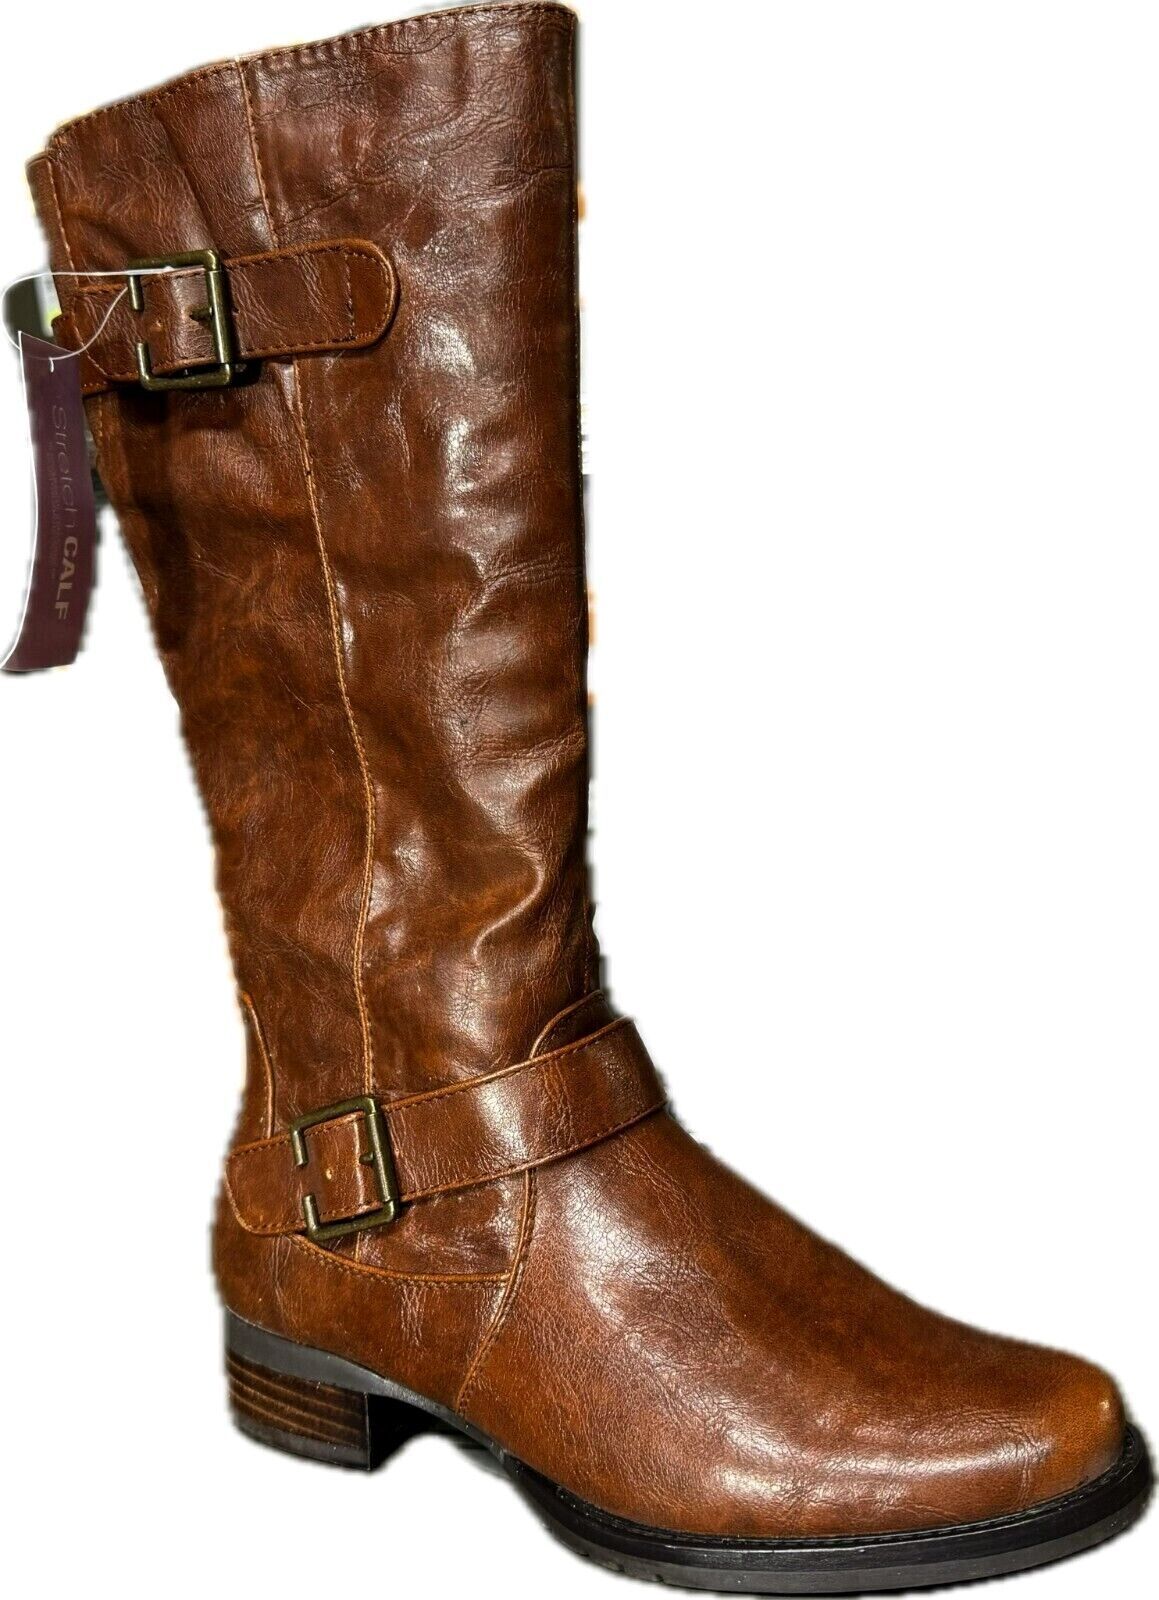 Primary image for EASY SPIRIT Women's Rust Stretchy Zip Boots Size 6